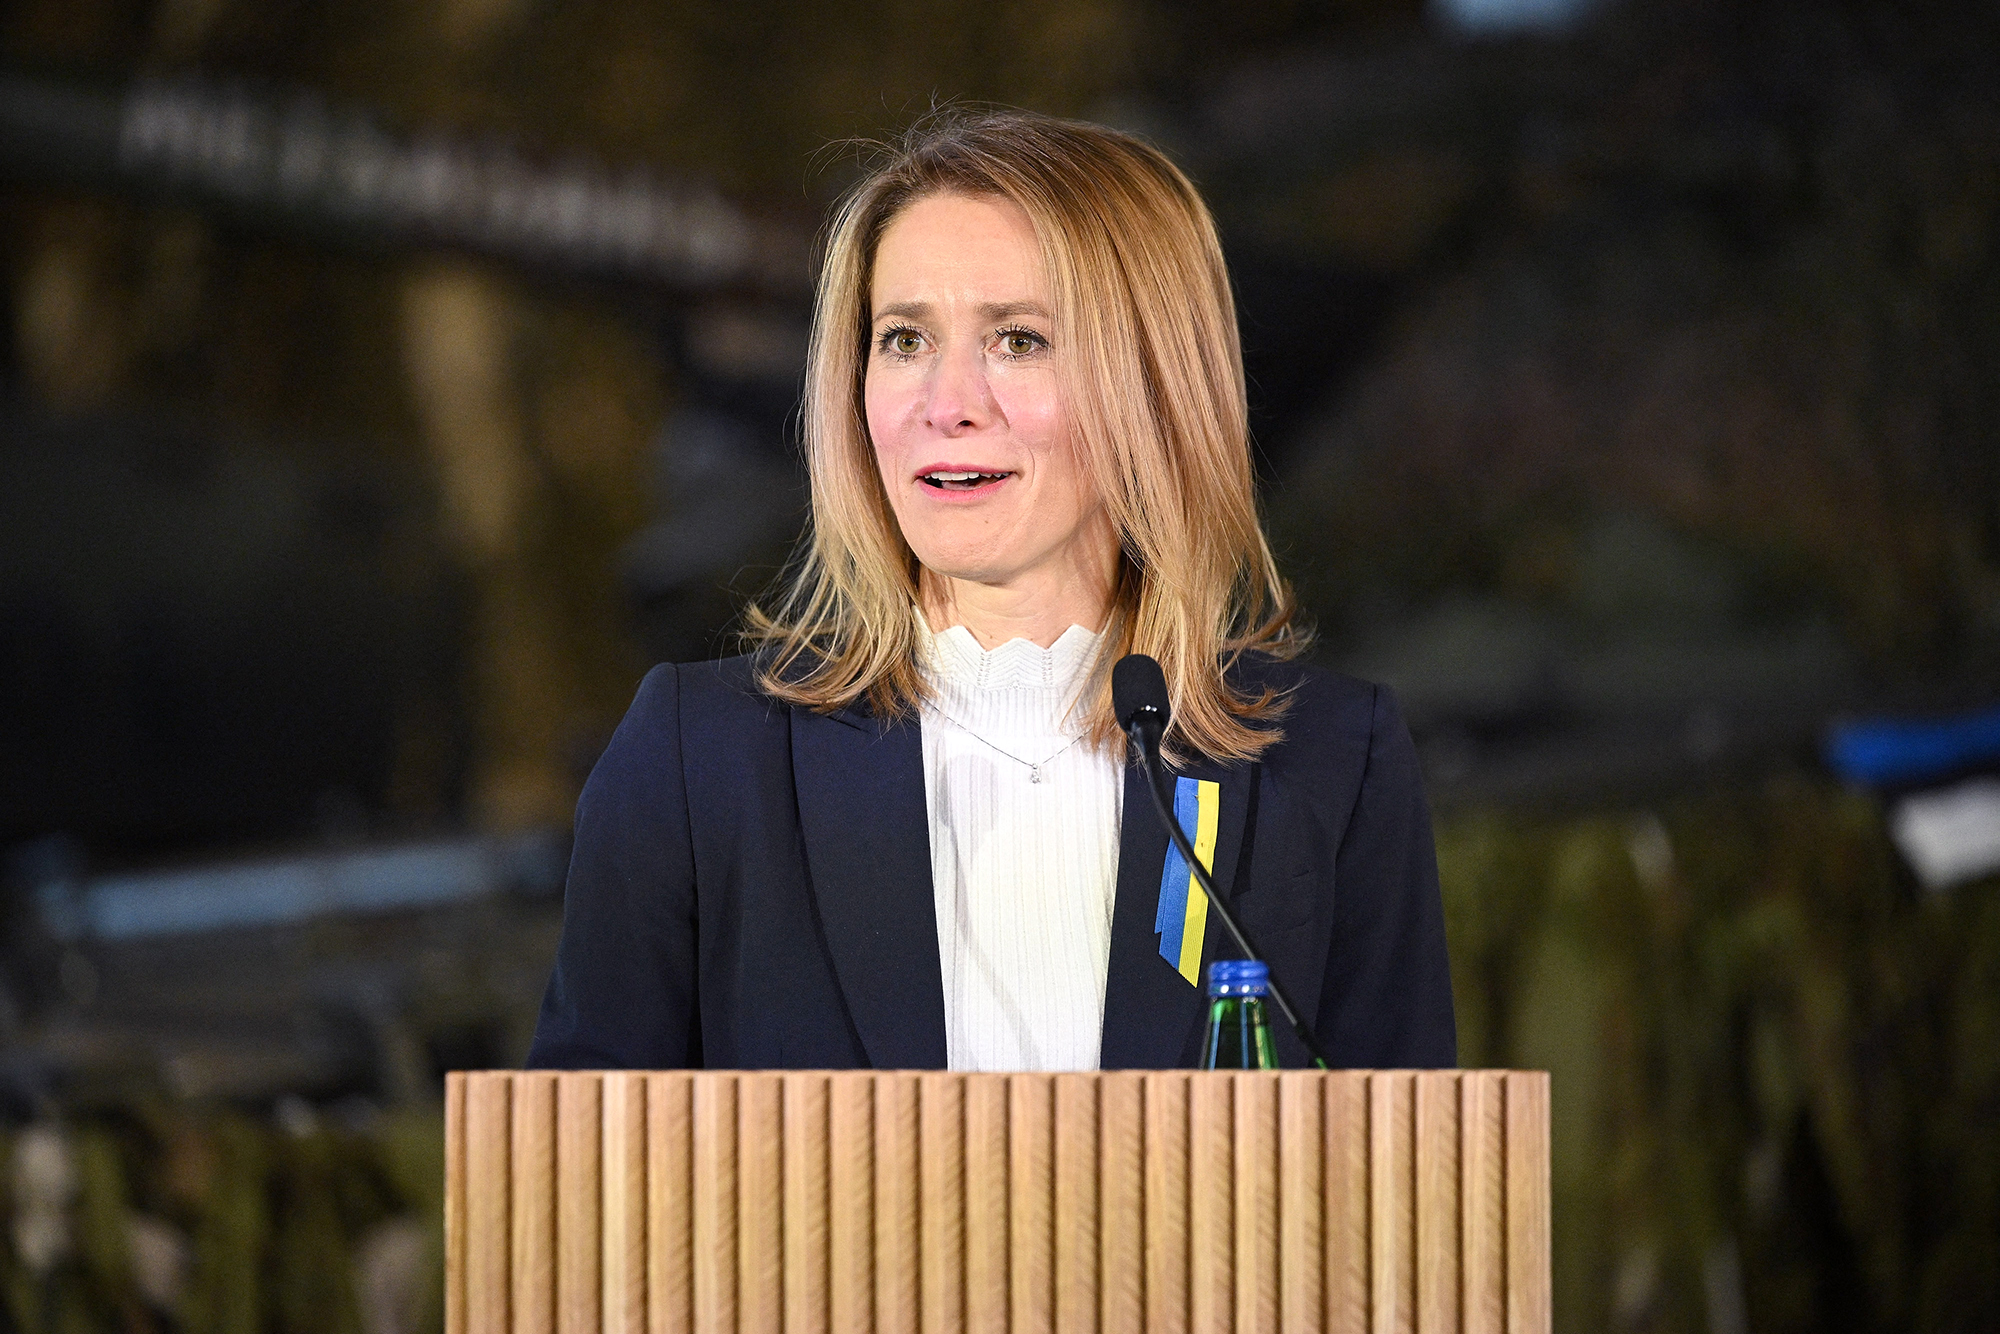 Prime Minister of Estonia Kaja Kallas speaks during a joint press conference at the Tapa Army Base on March 1, in Tallinn, Estonia.